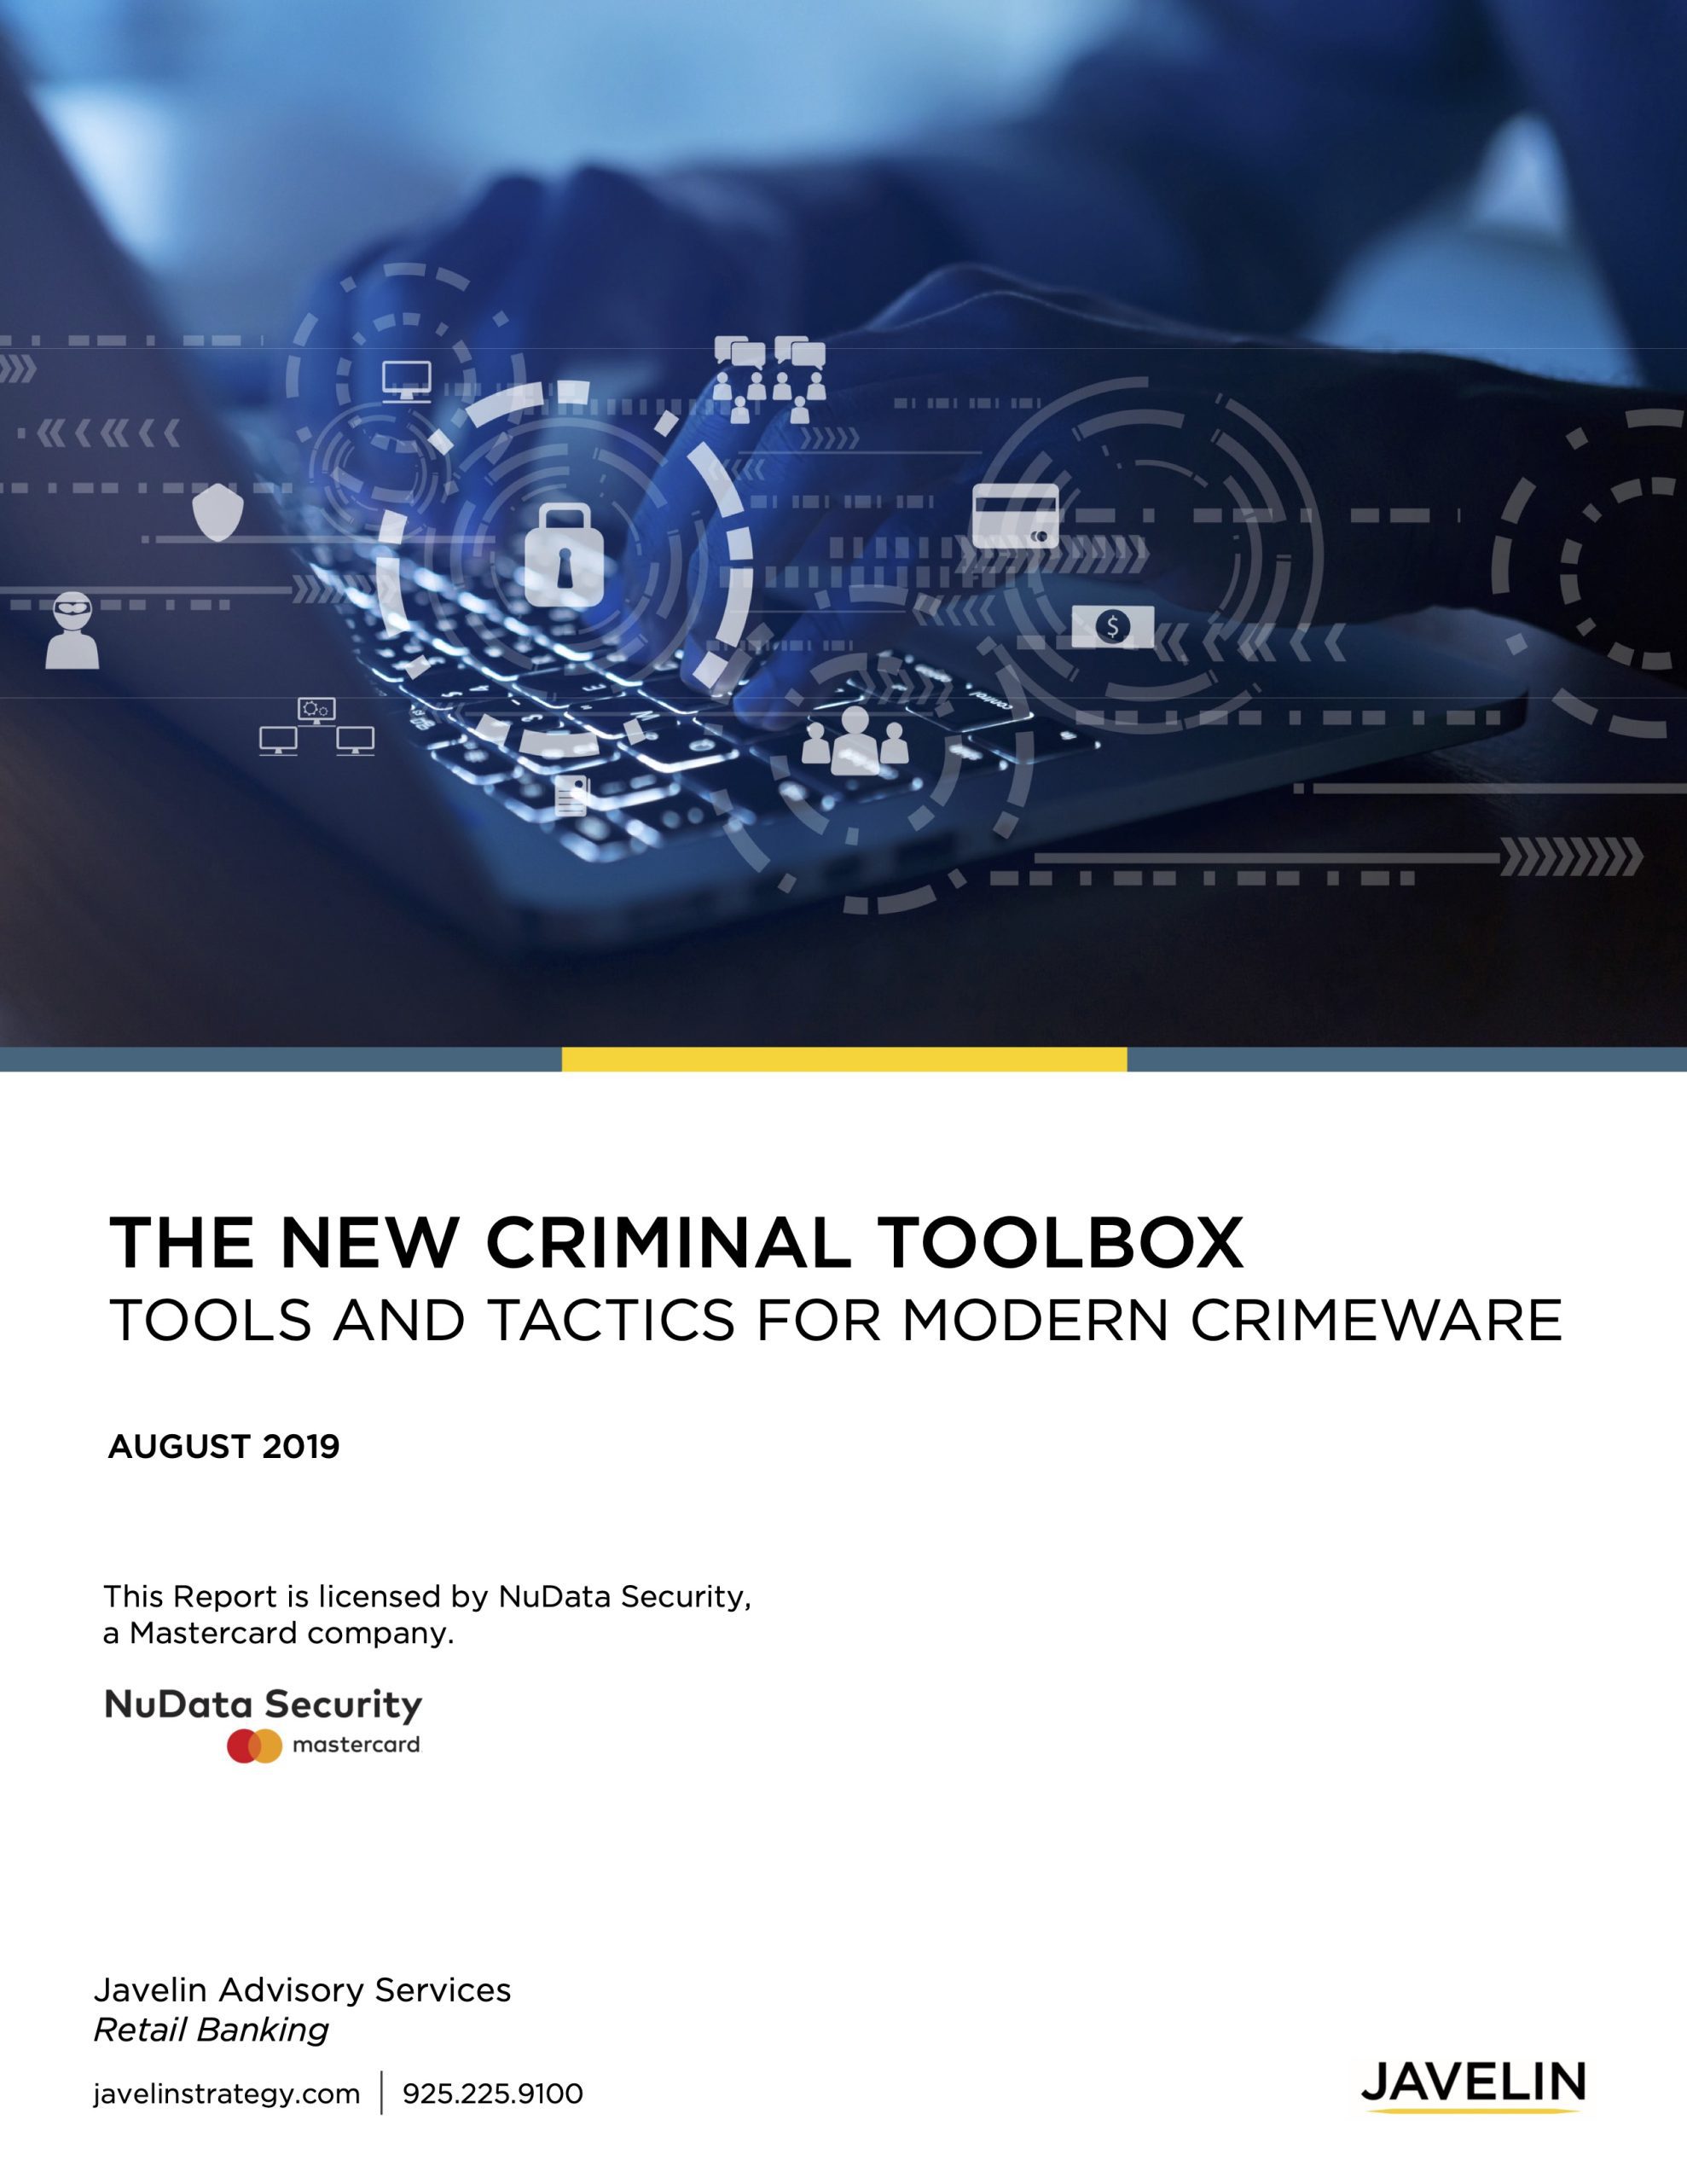 The new criminal toolbox